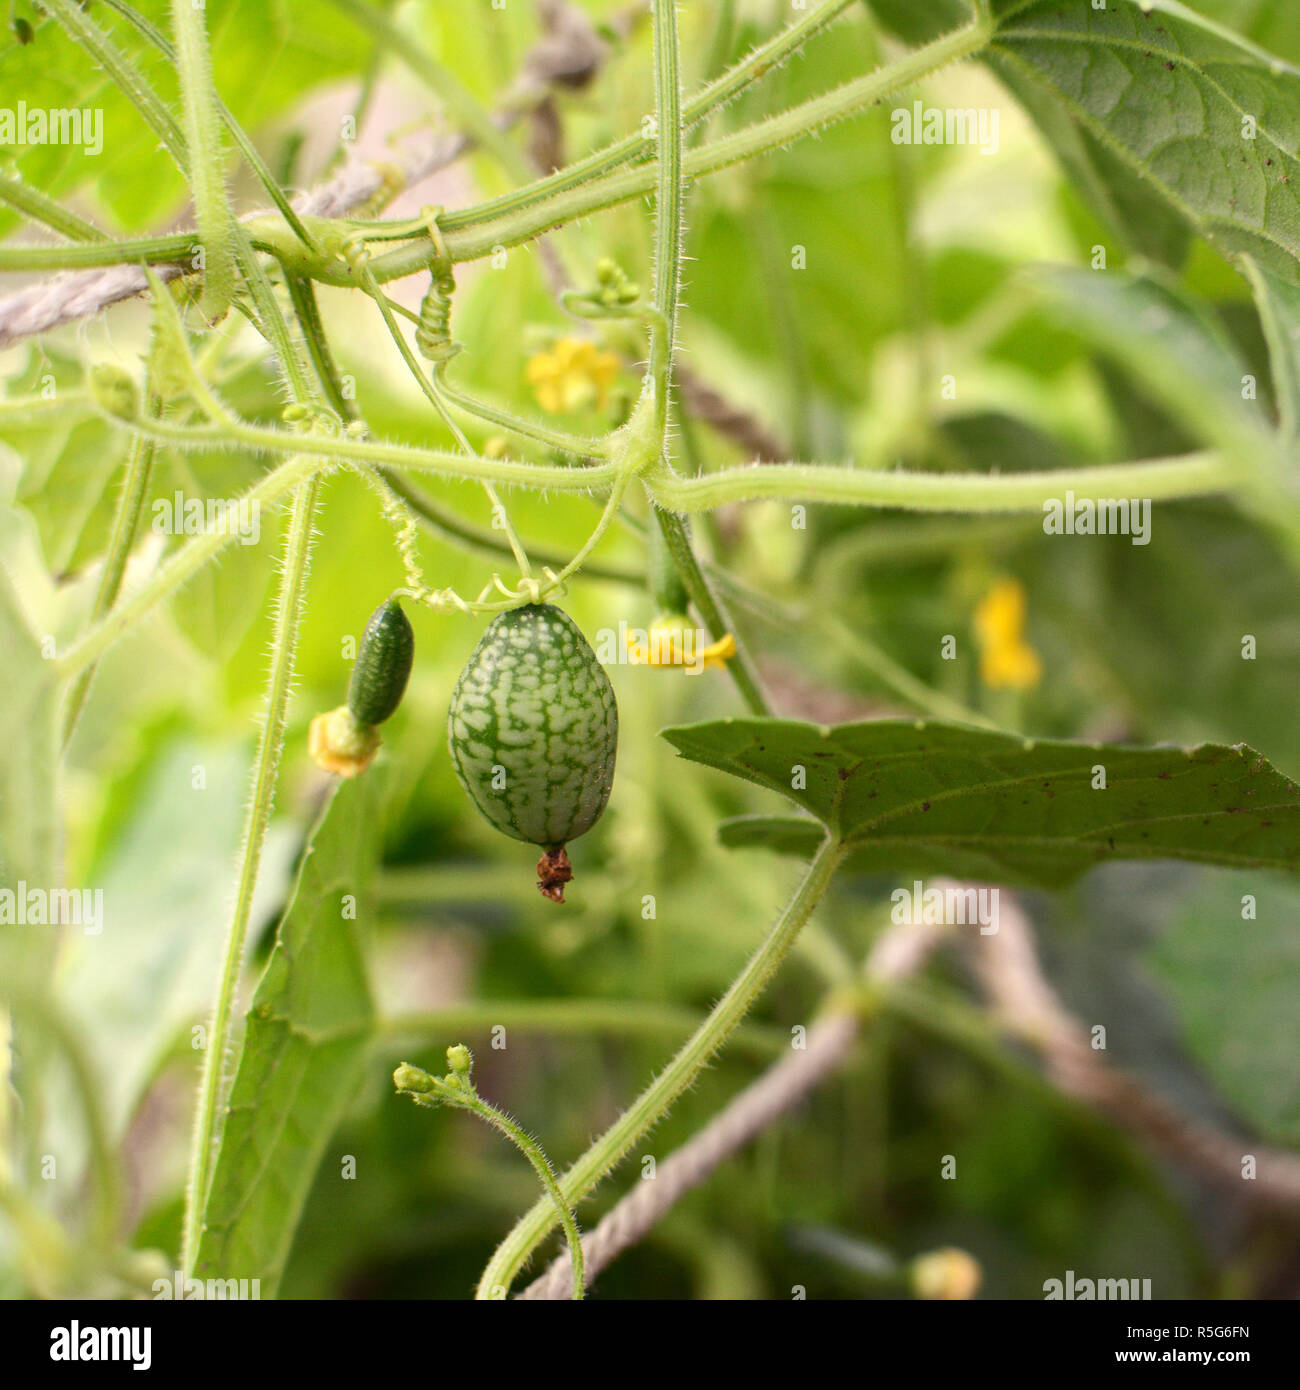 Grape-size cucamelon fruit hanging from vine Stock Photo